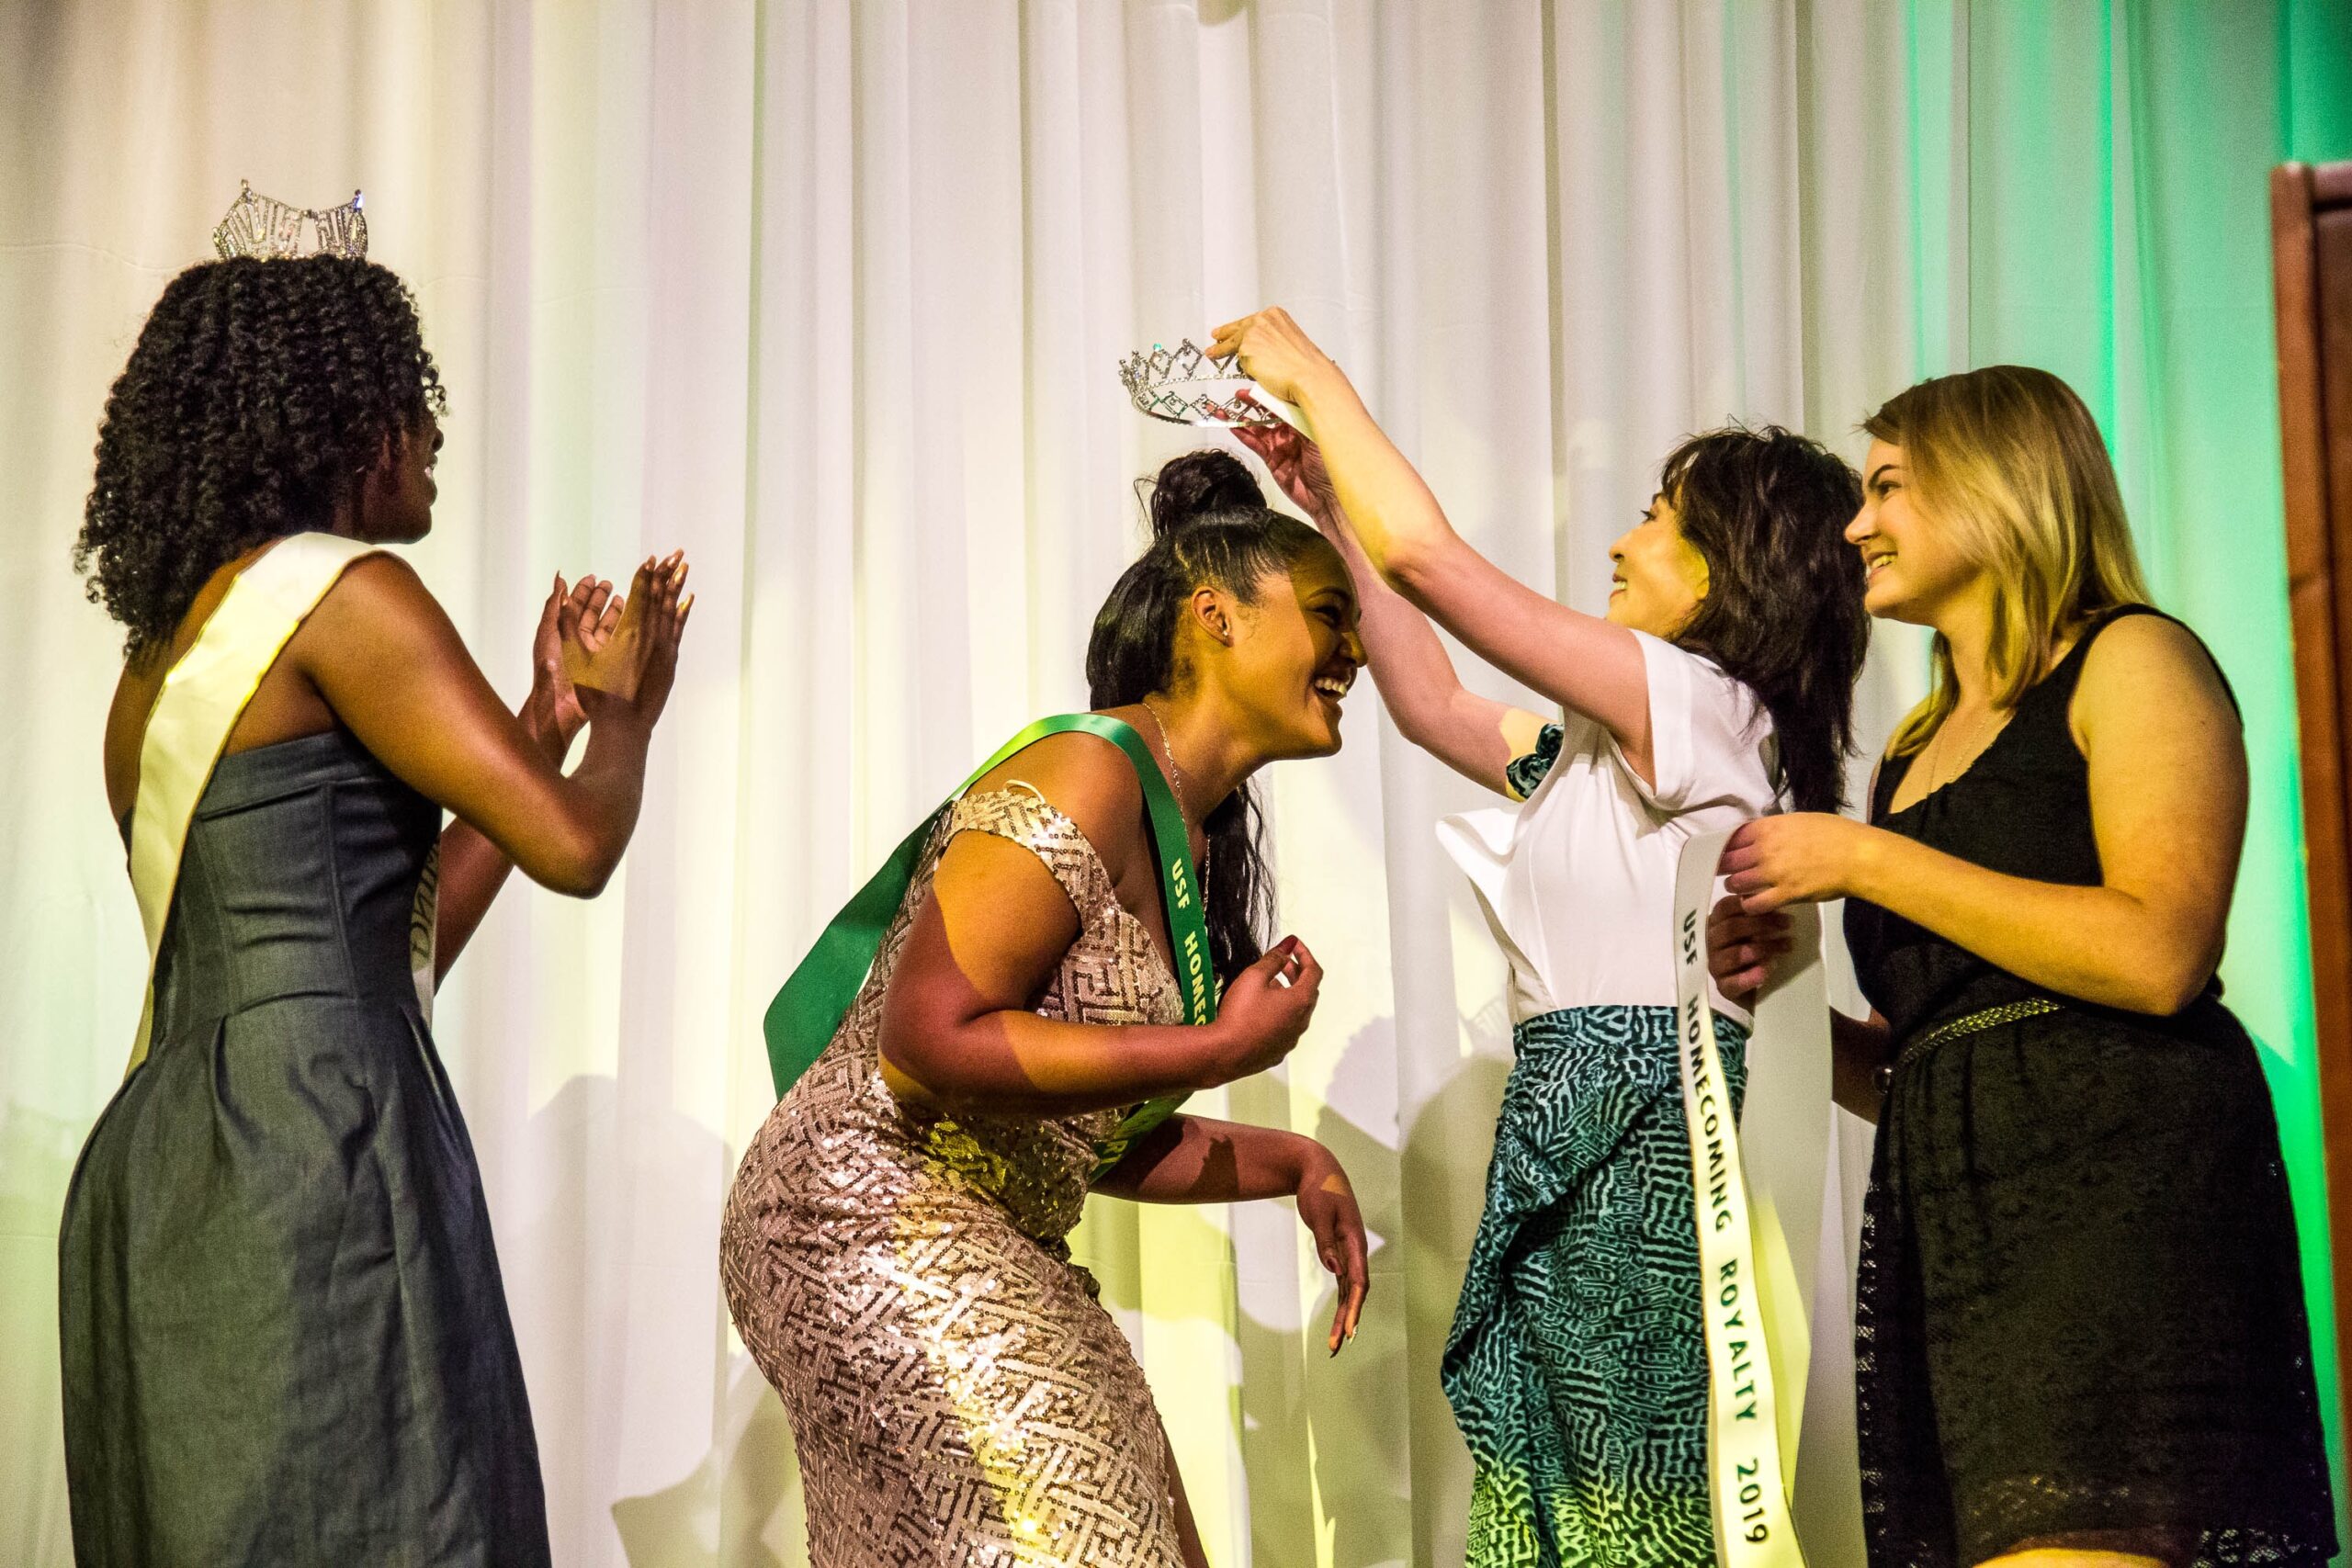 USF Pageant welcomes students of all gender identities following event name change